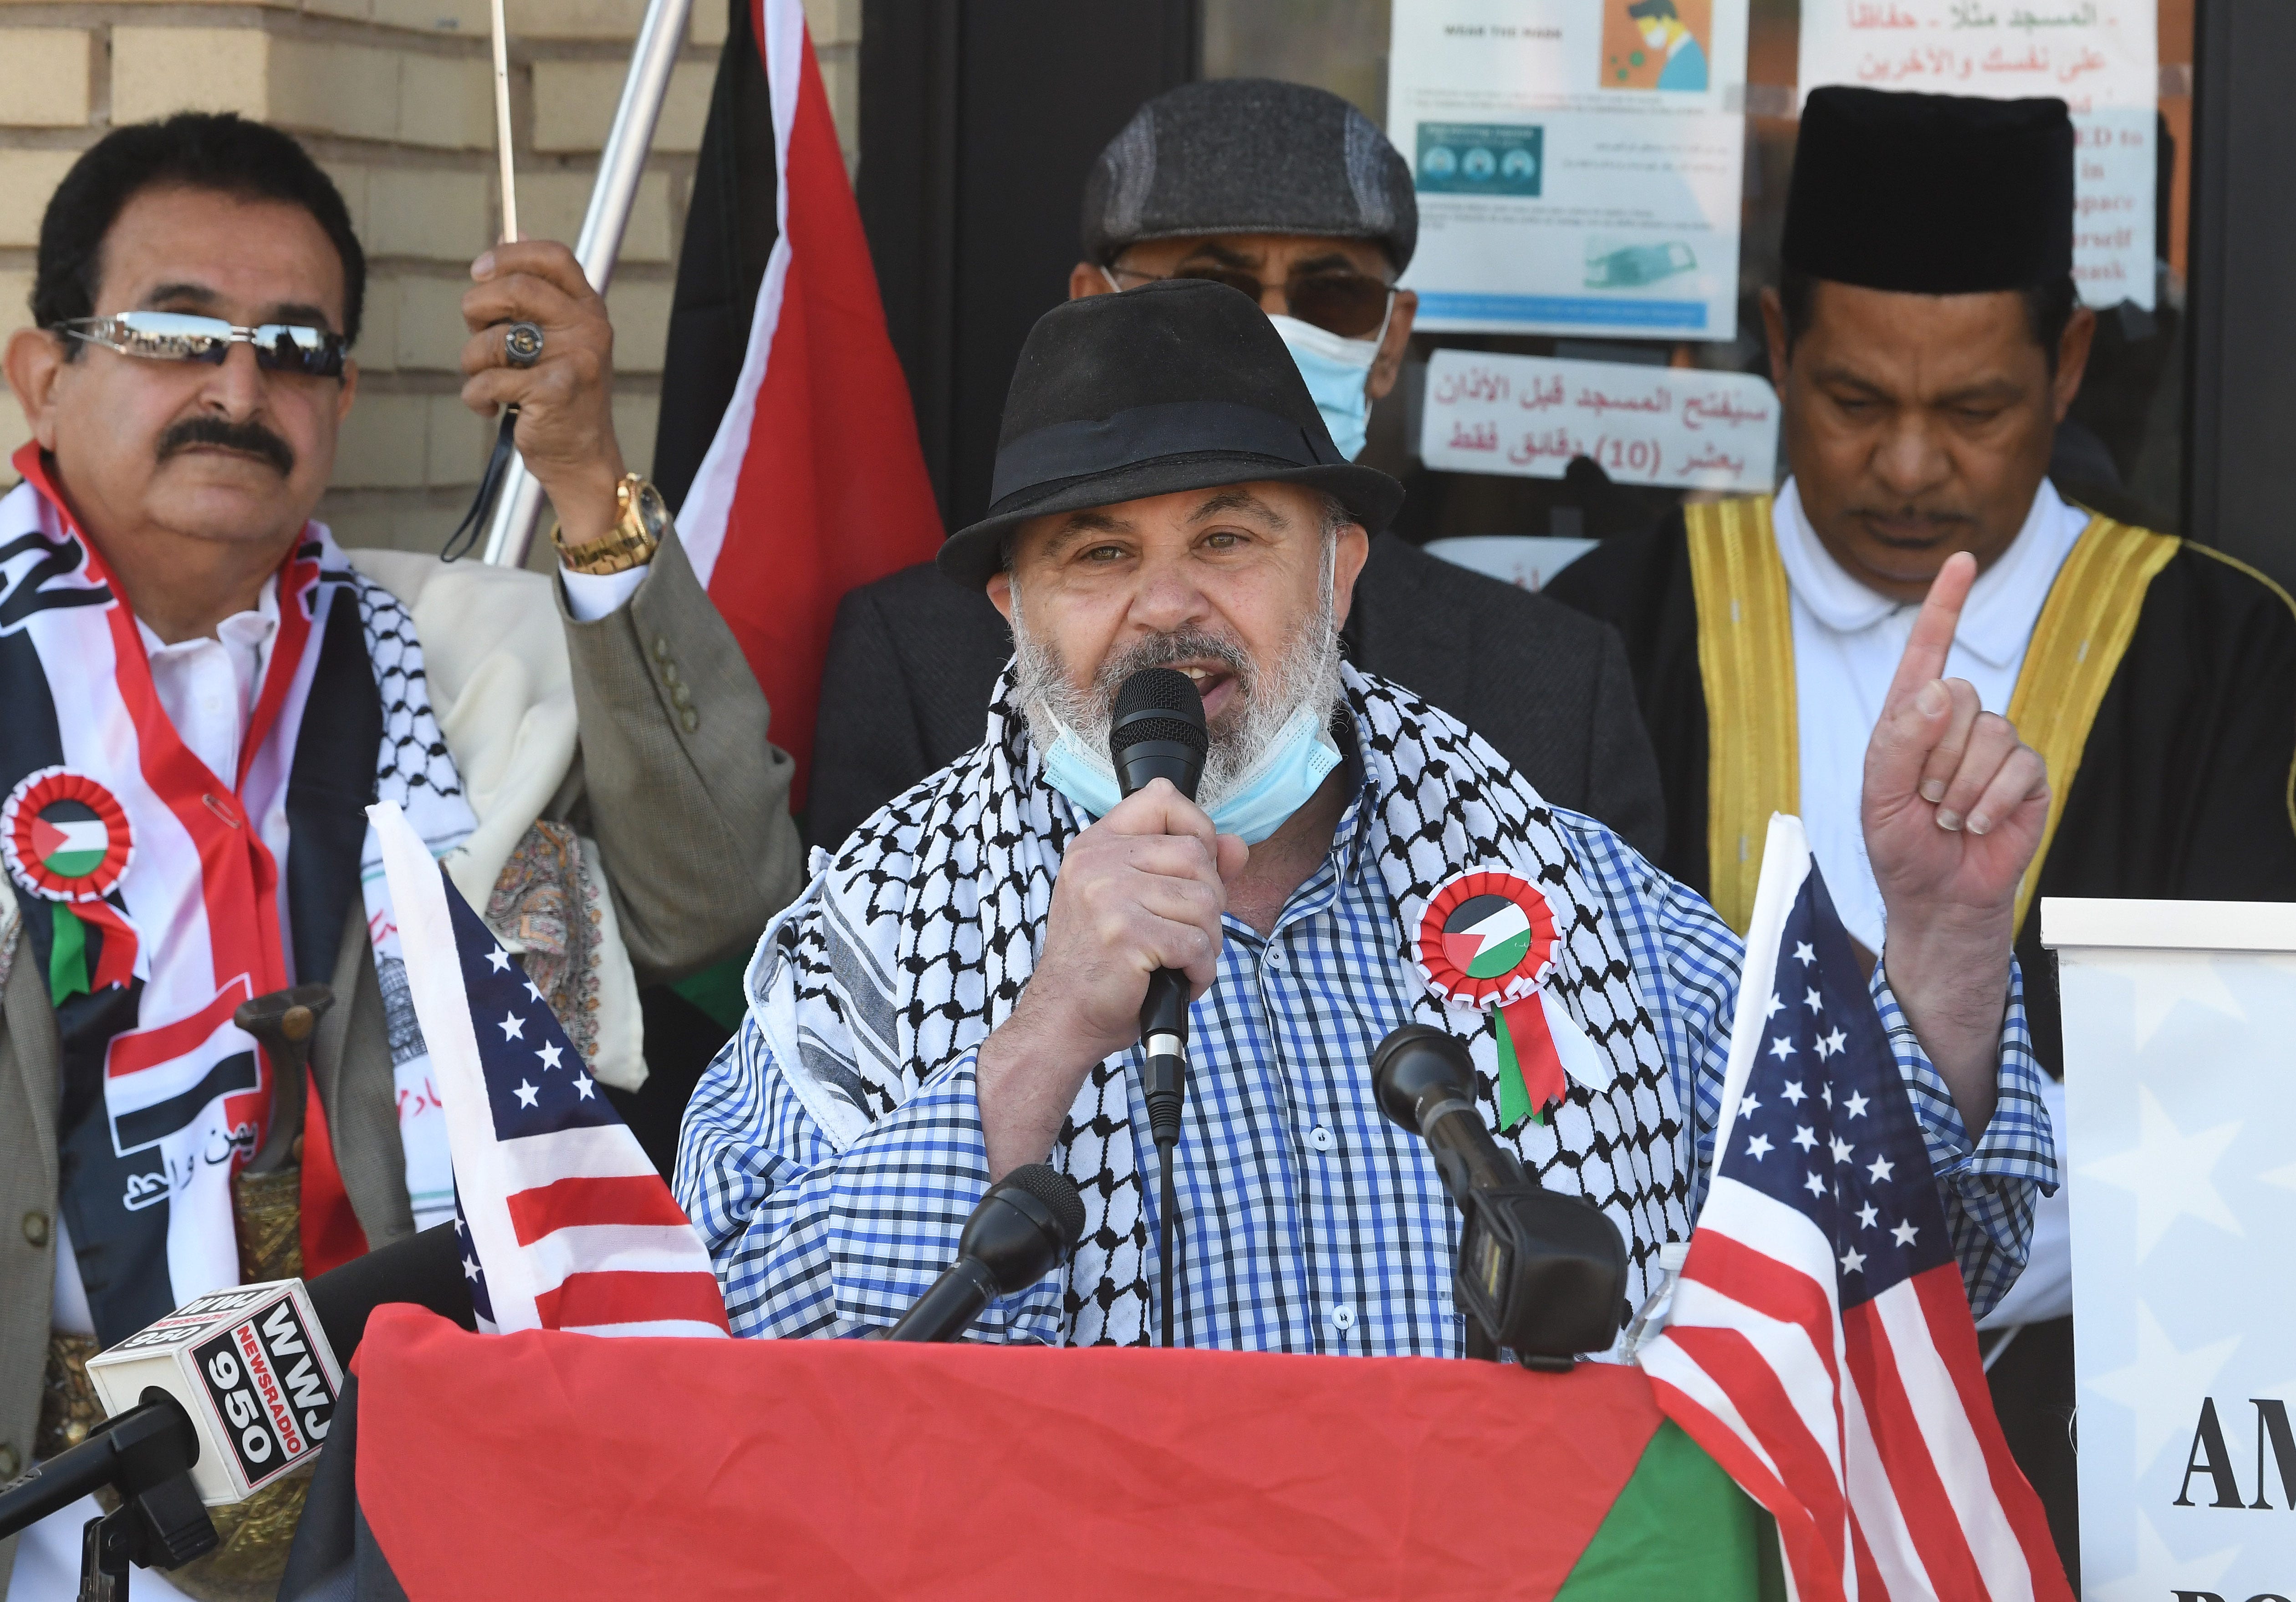 Imad Hamad, executive Director of the American Human Rights Council, AHRC, speaks during a news conference to urge the Biden administration take immediate action at the AMS Mosque in Dearborn, Michigan on May 18, 2021.